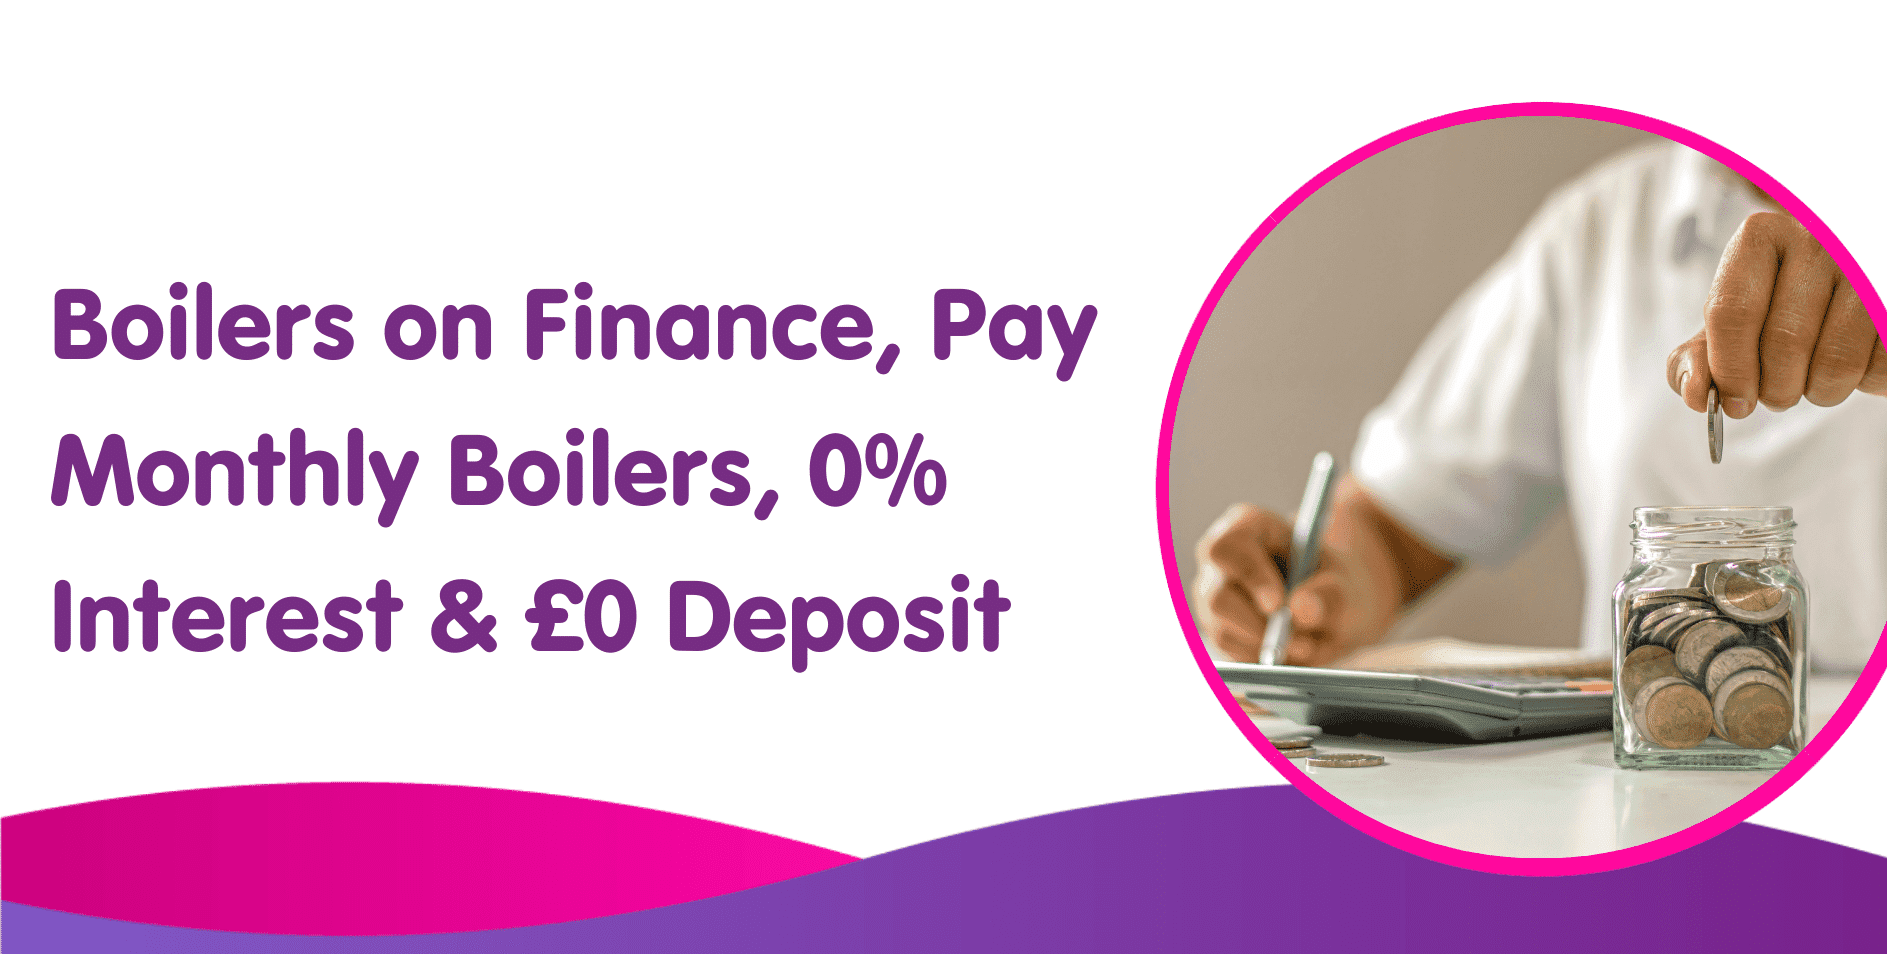 Boilers on Finance, Pay Monthly Boilers, 0% Interest & £0 Deposit